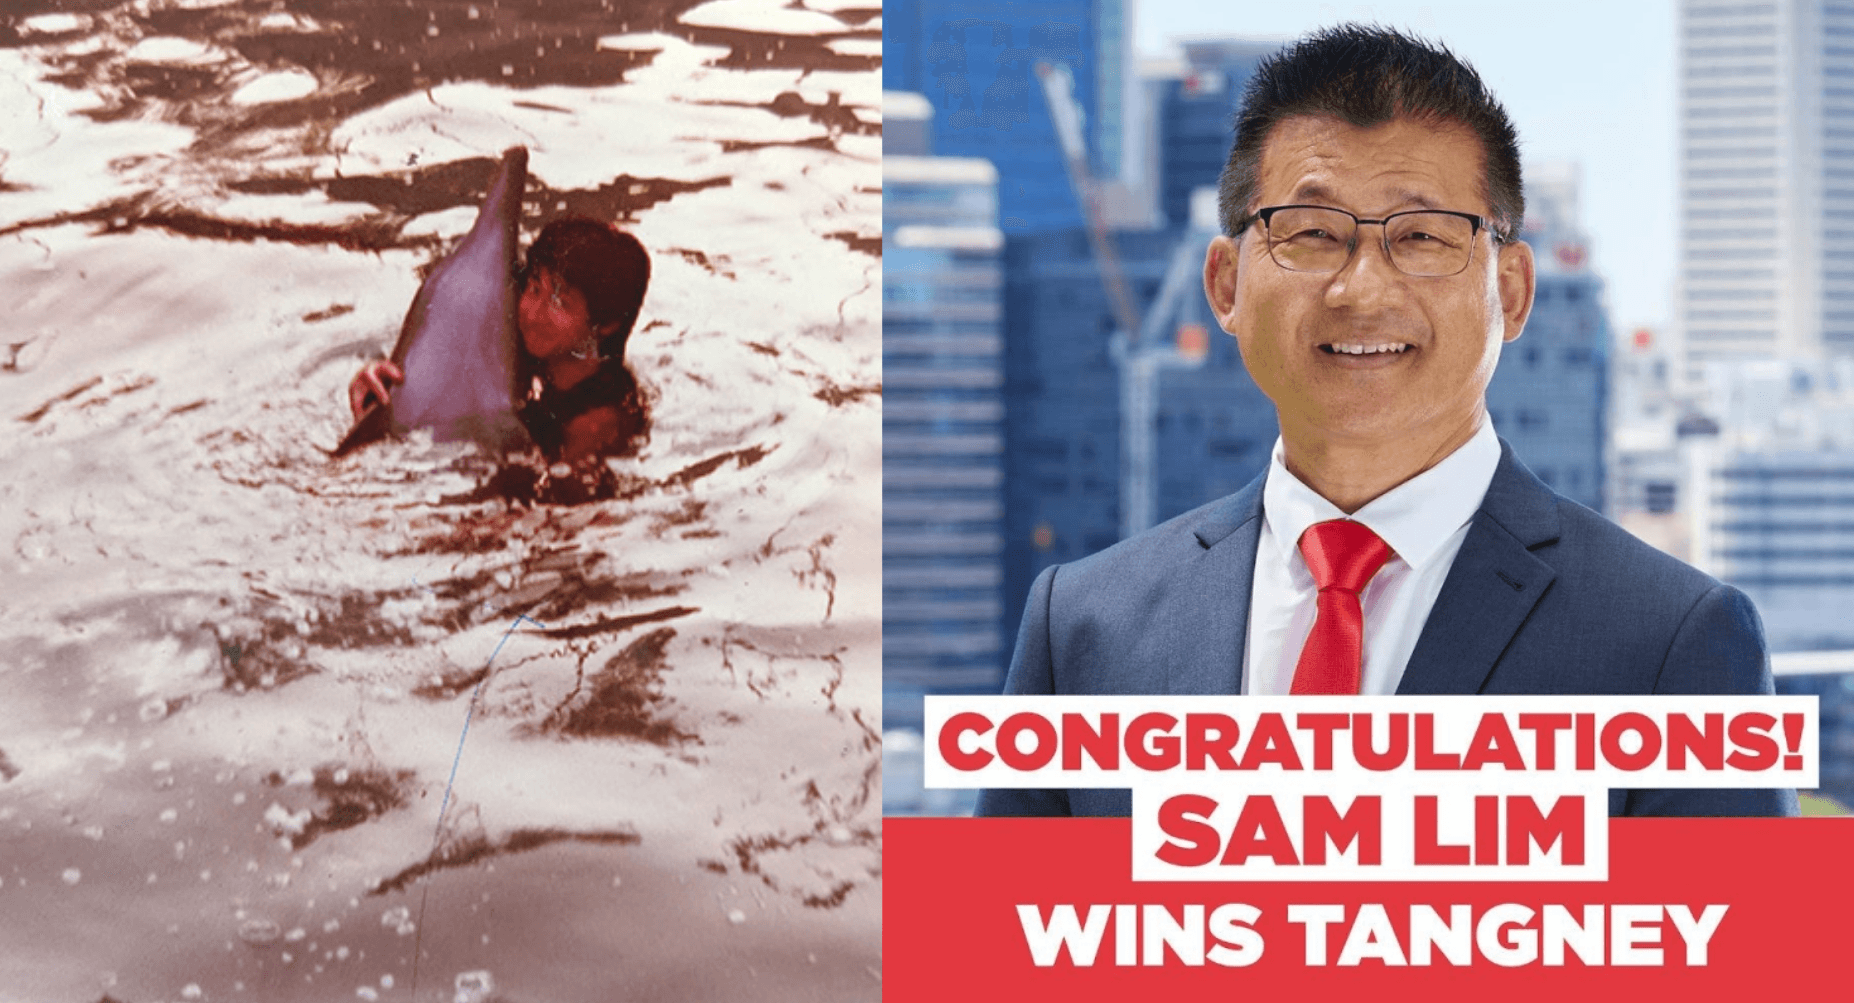 Meet Sam Lim: From Dolphin Trainer & Policeman To Becoming An MP In West Australia